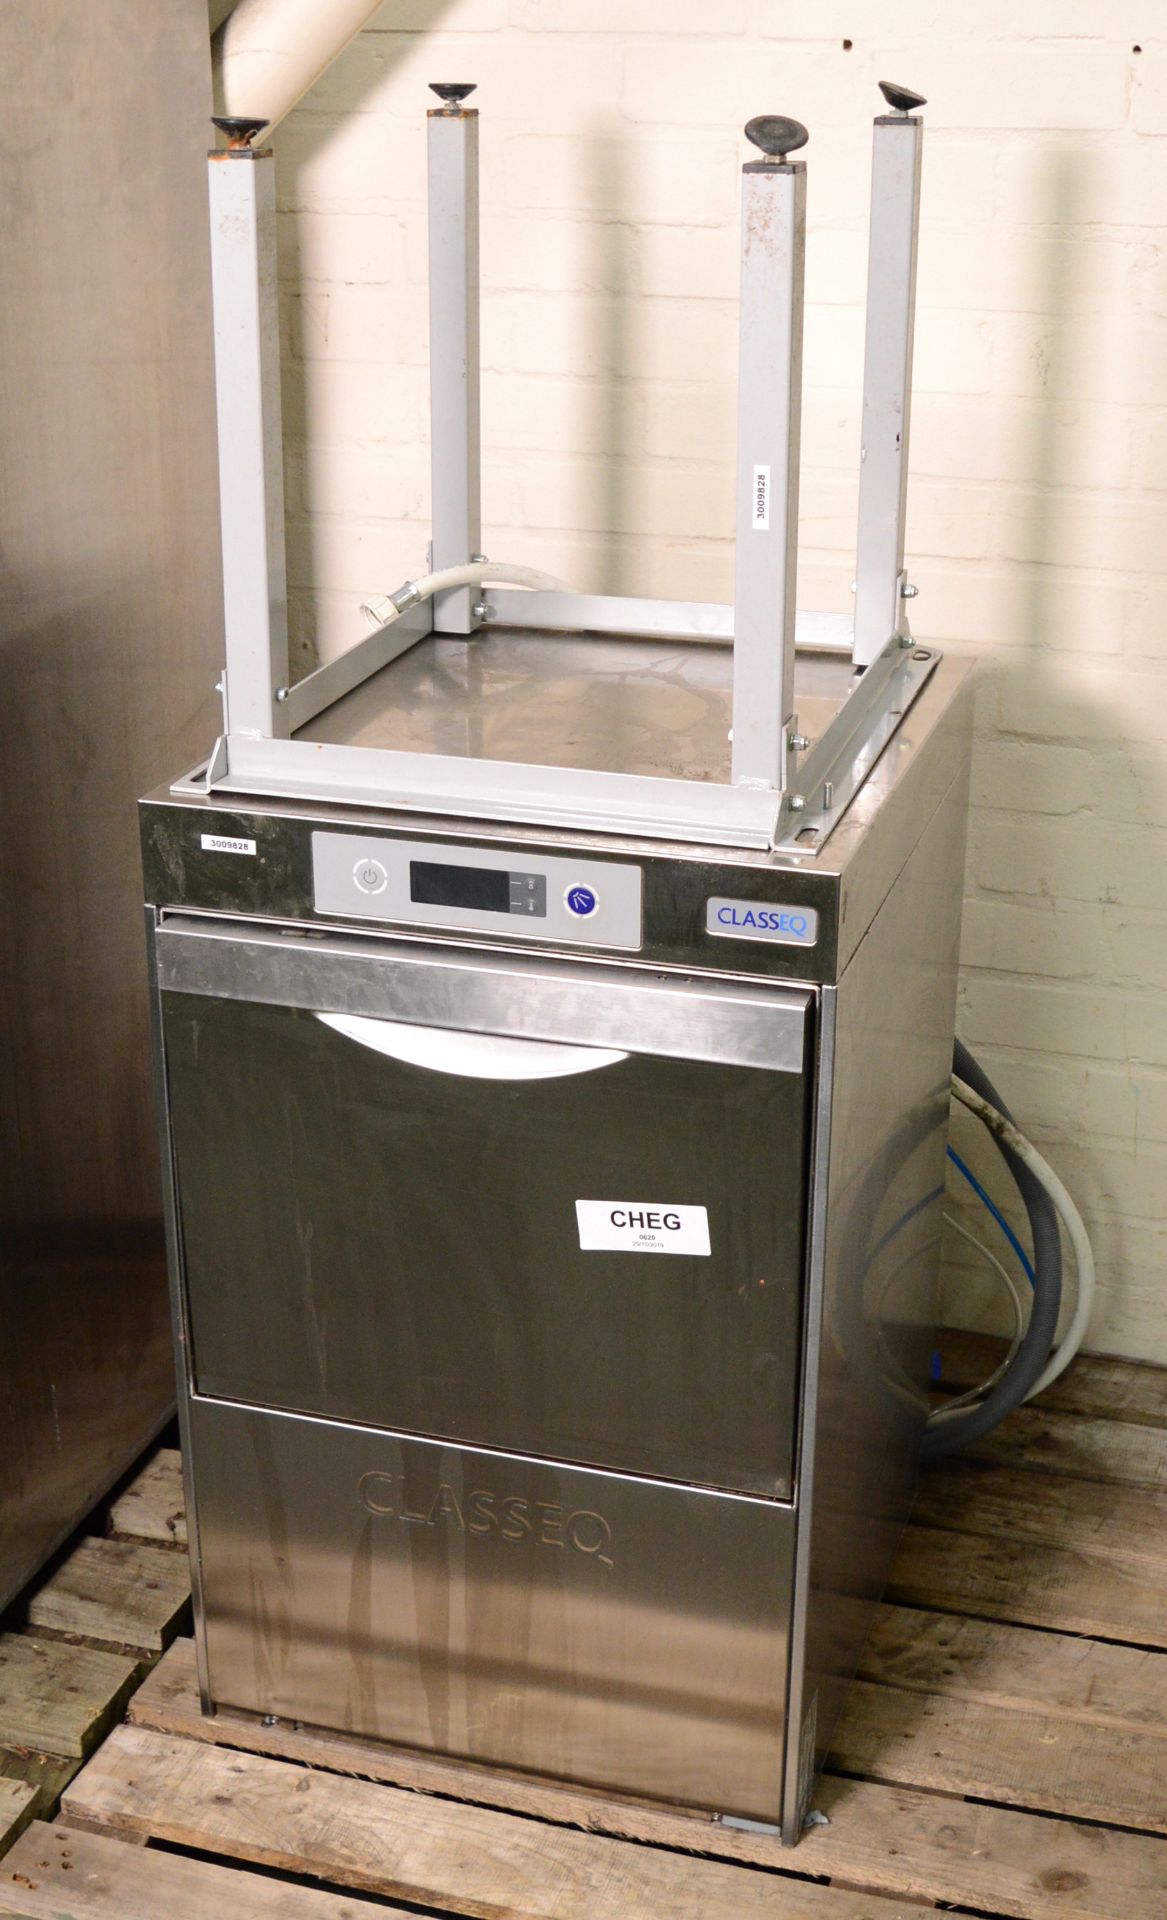 Classeq D400 Duo Dishwasher With Stand W470 x D517 x H775mm.